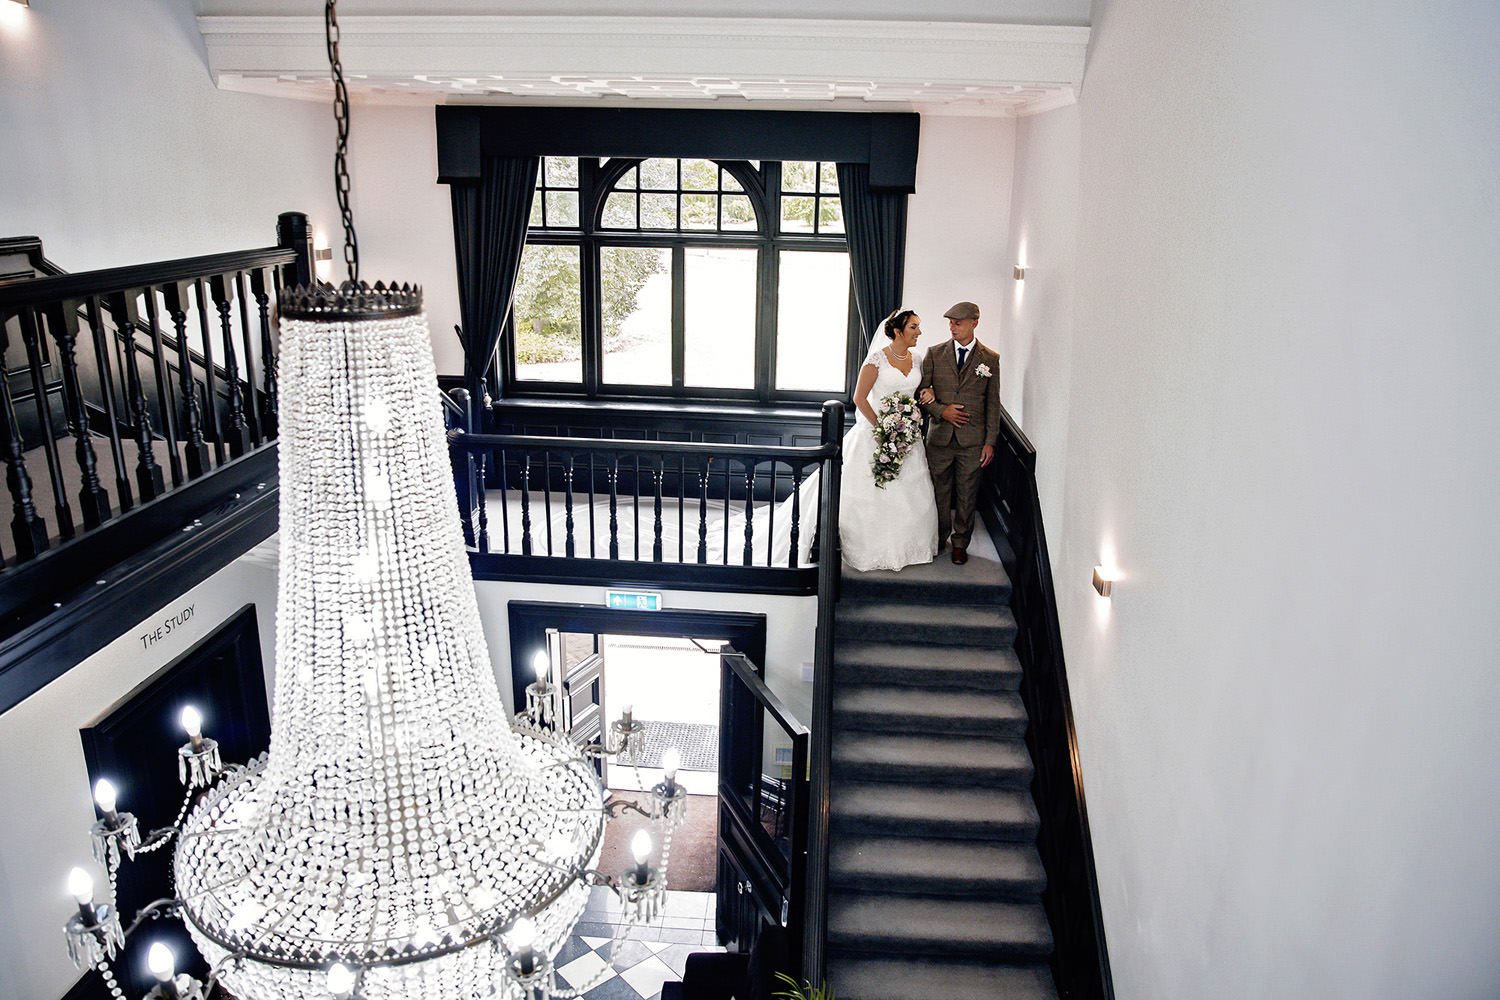 The famous Swynford Manor chandelier and winding staircase